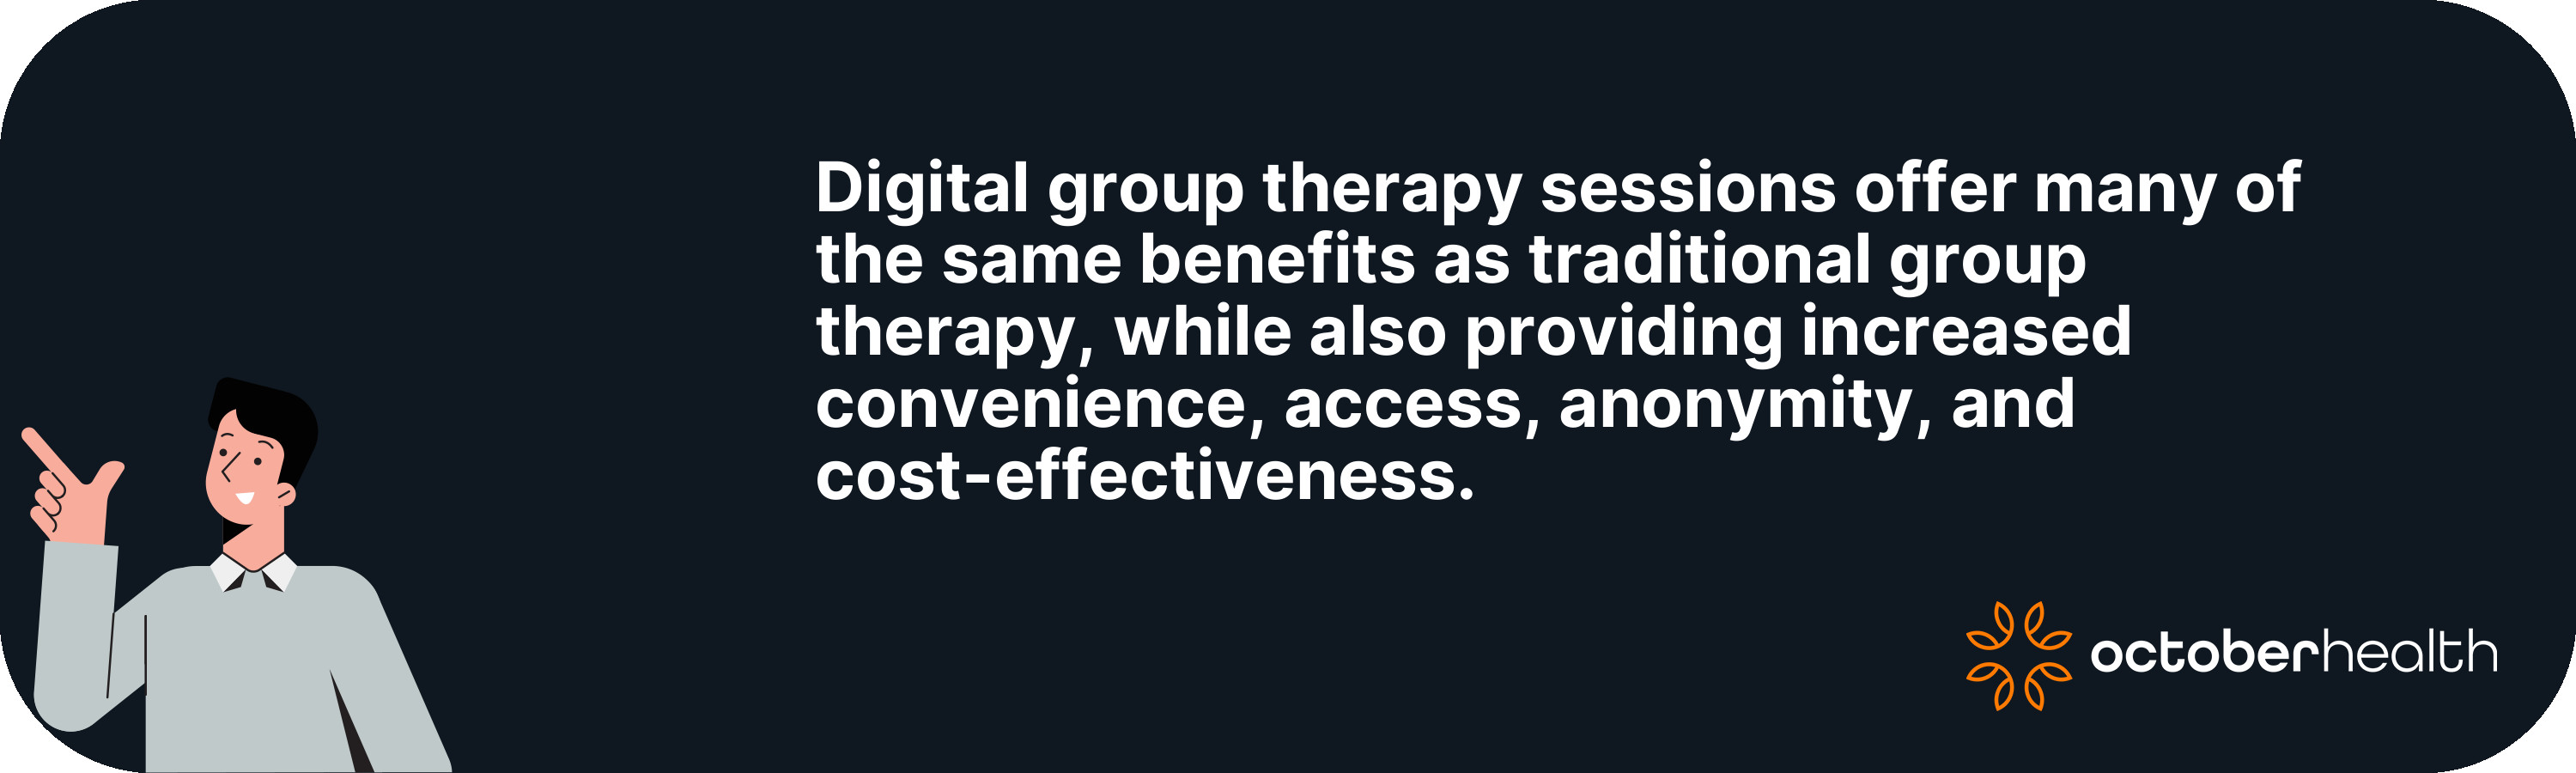 Digital group therapy sessions offer many...